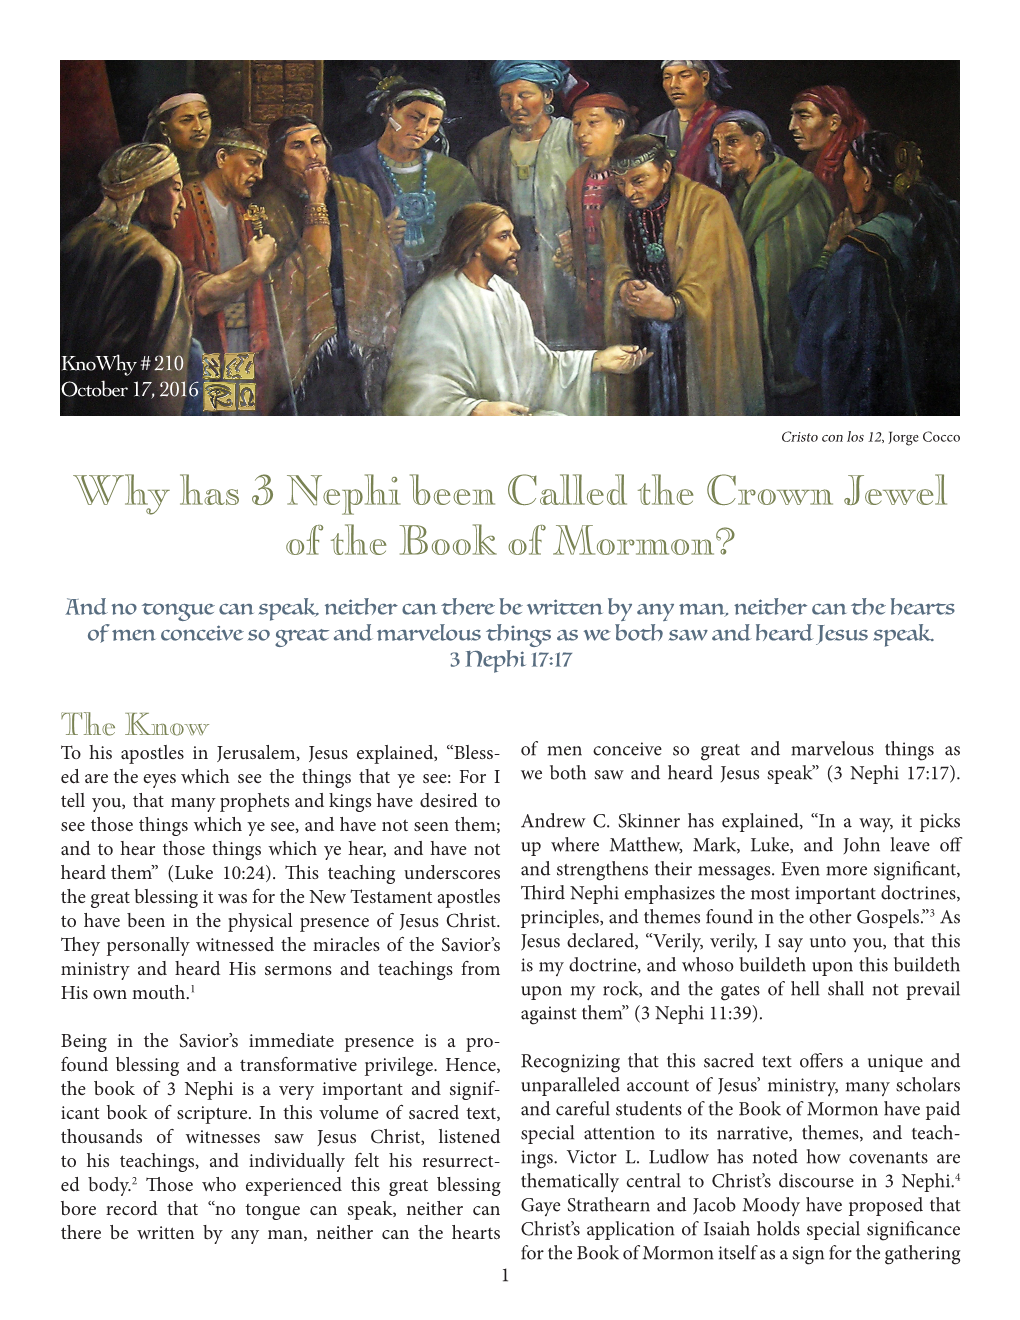 Why Has 3 Nephi Been Called the Crown Jewel of the Book of Mormon?